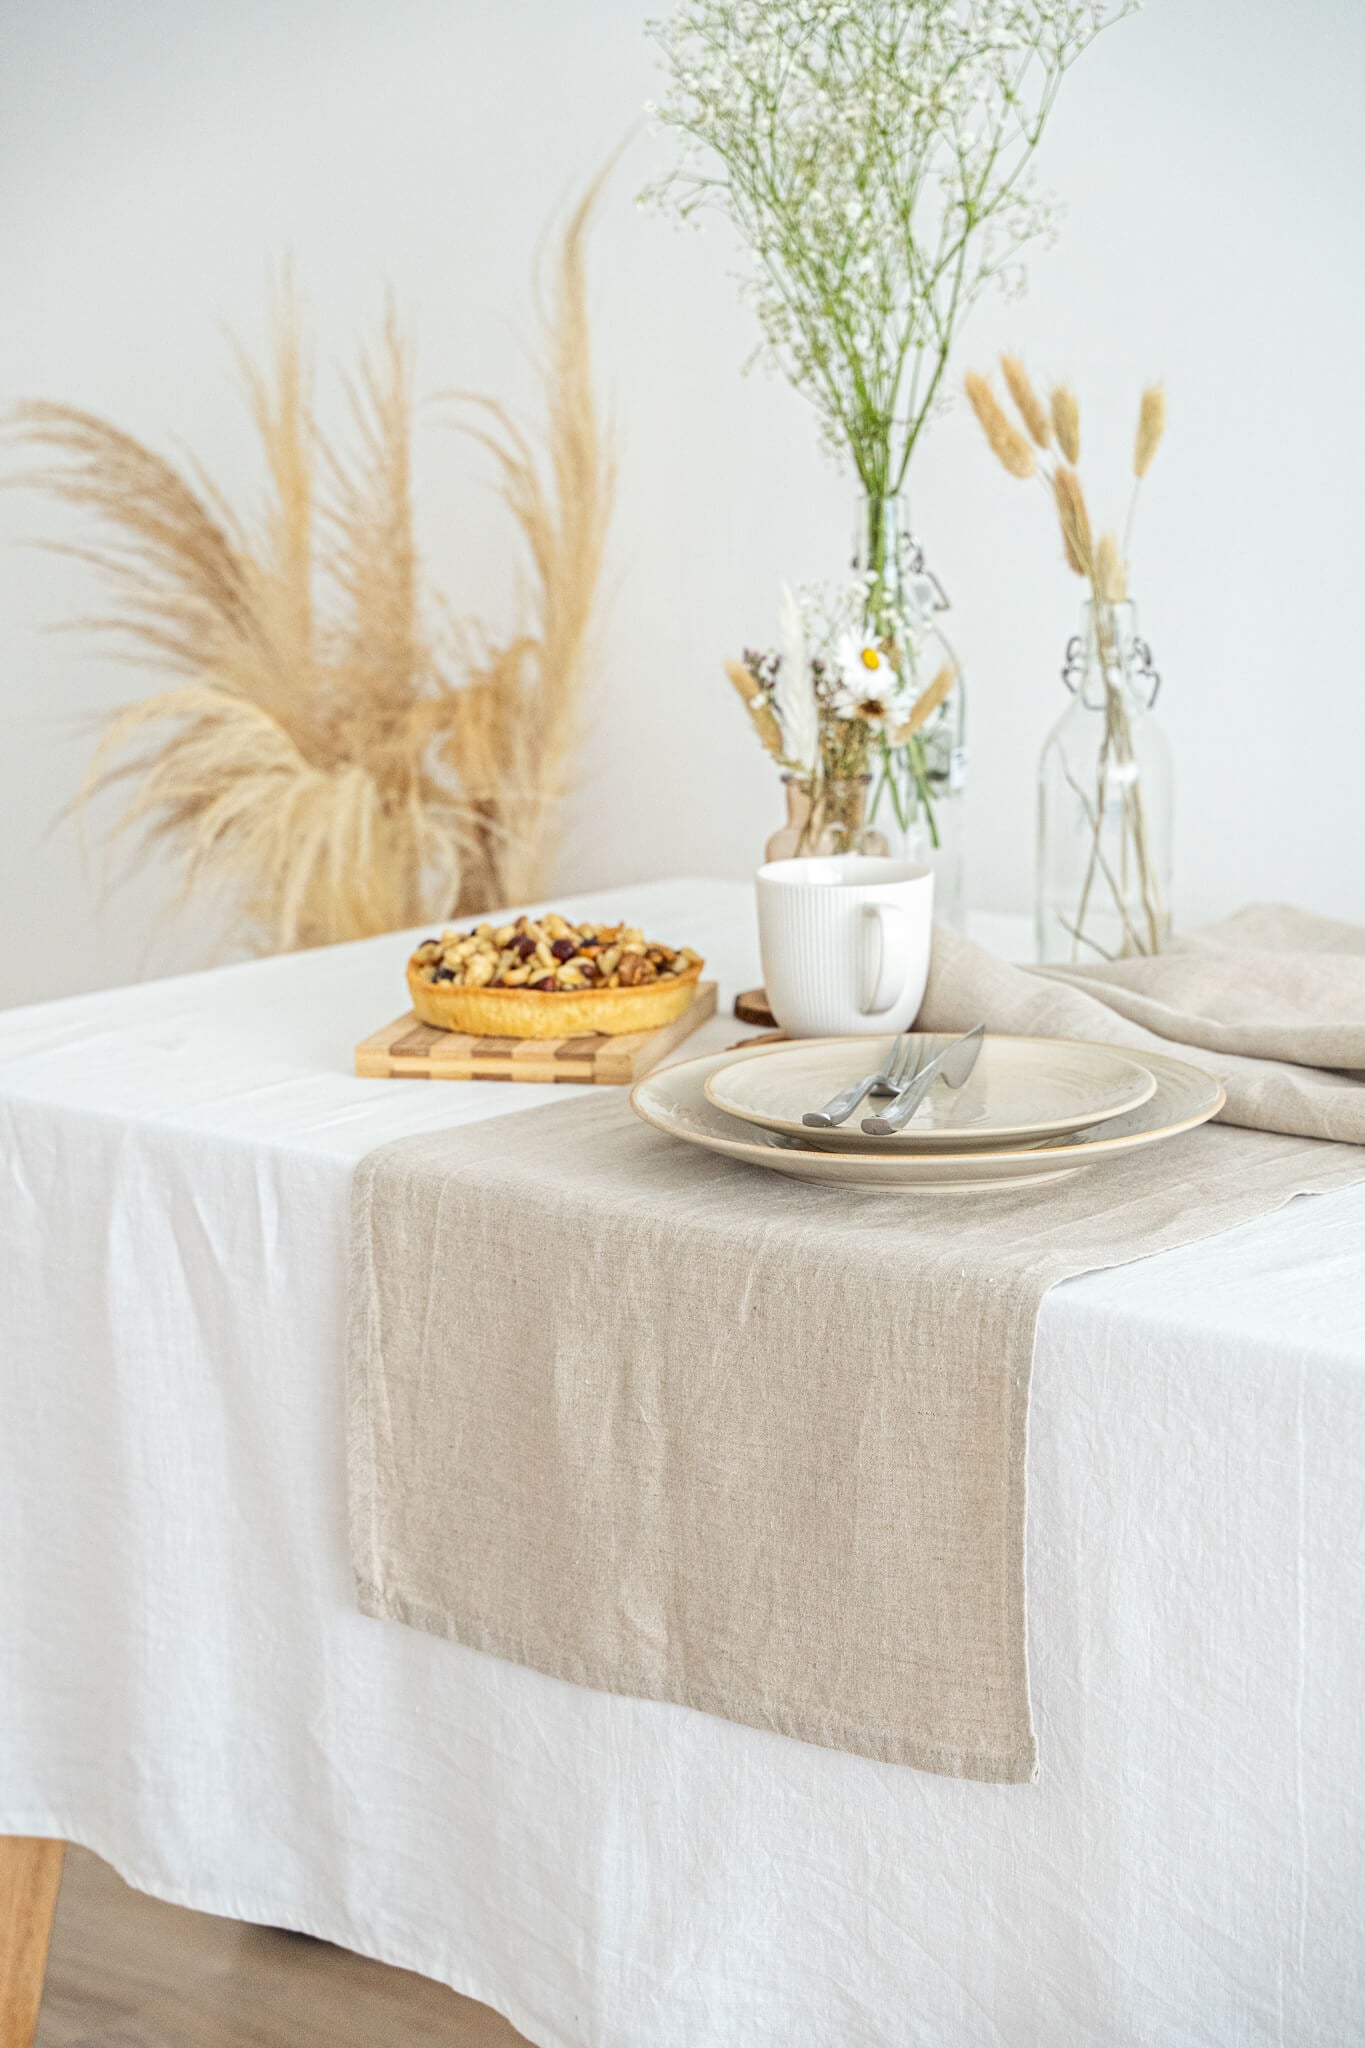 Linen table runner in Natural color